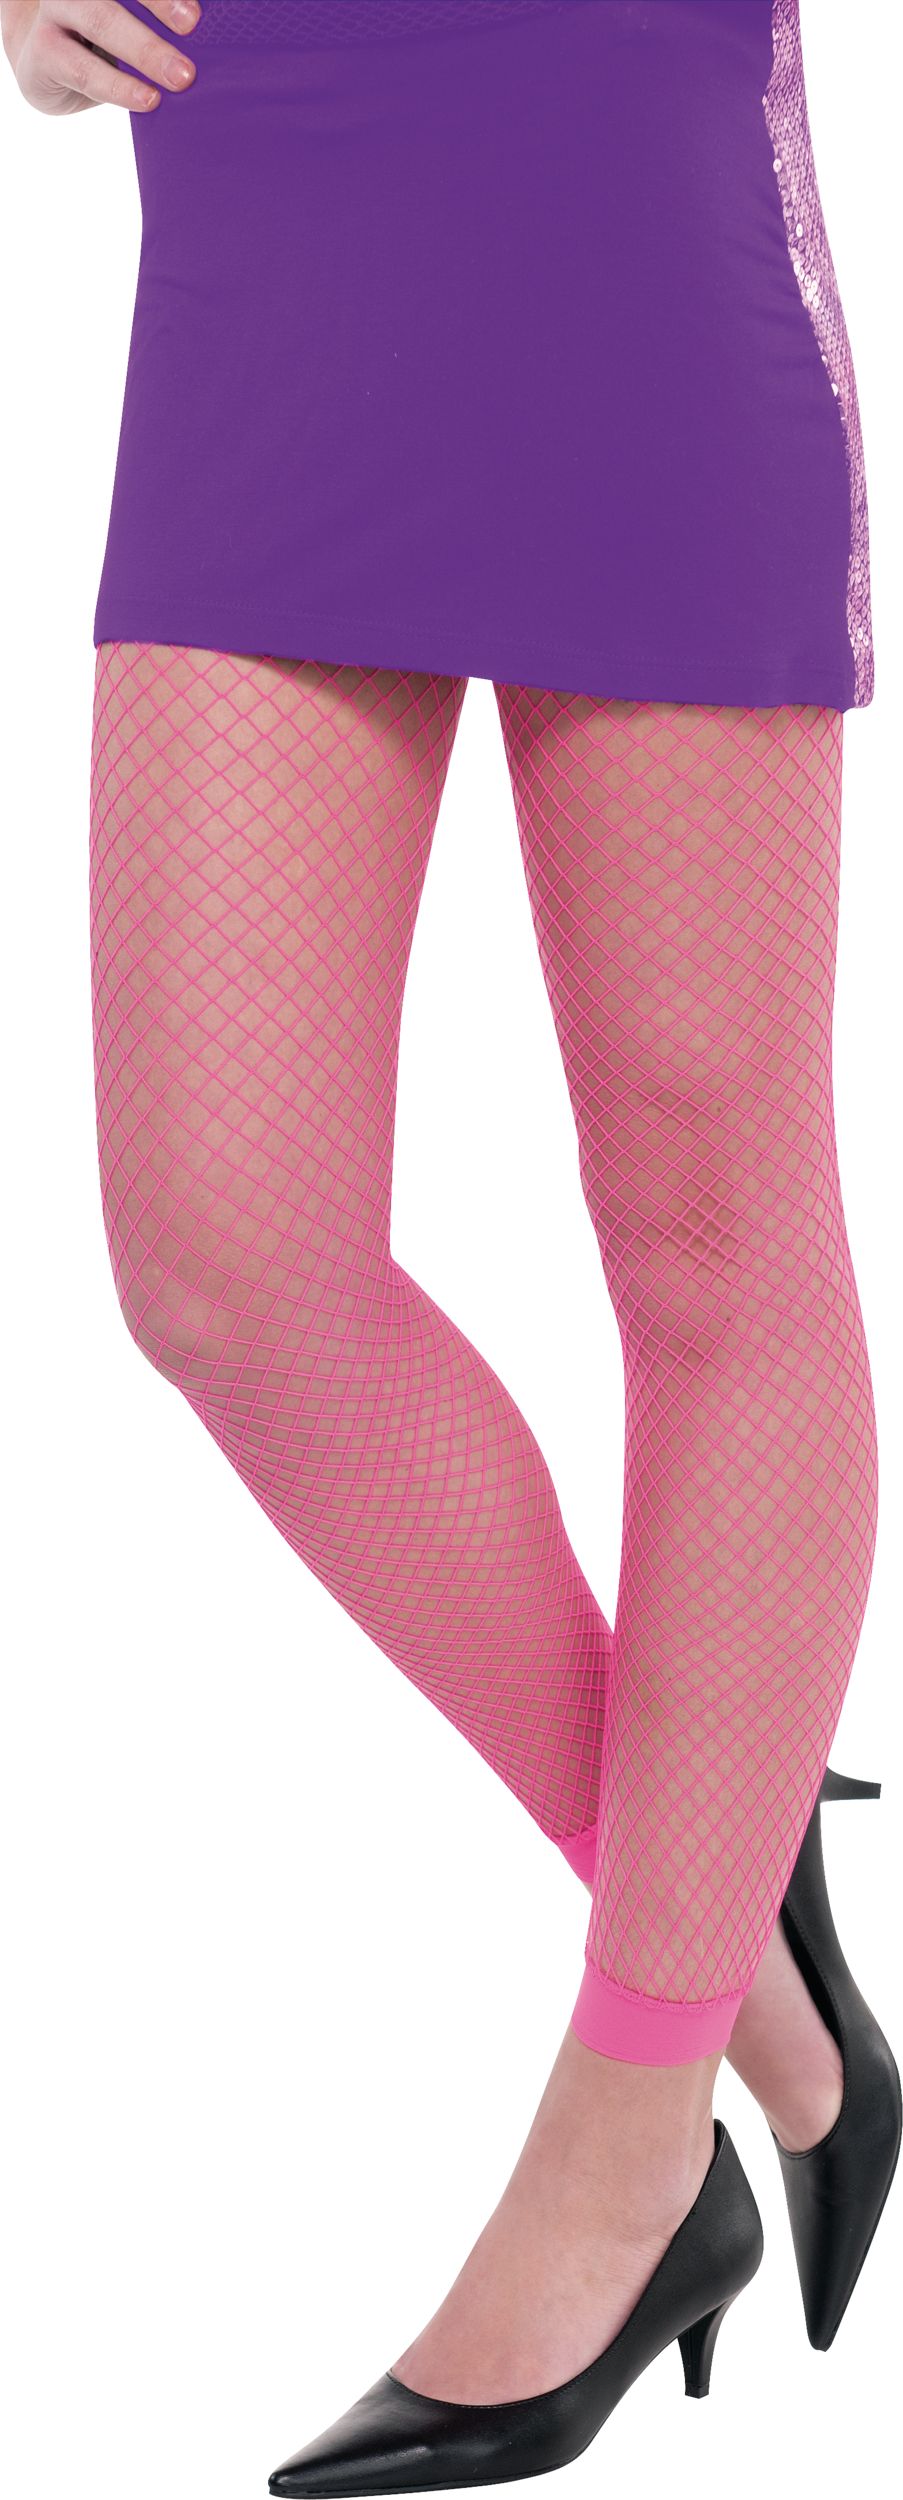 Neon Pink Tights - Costume Tights 